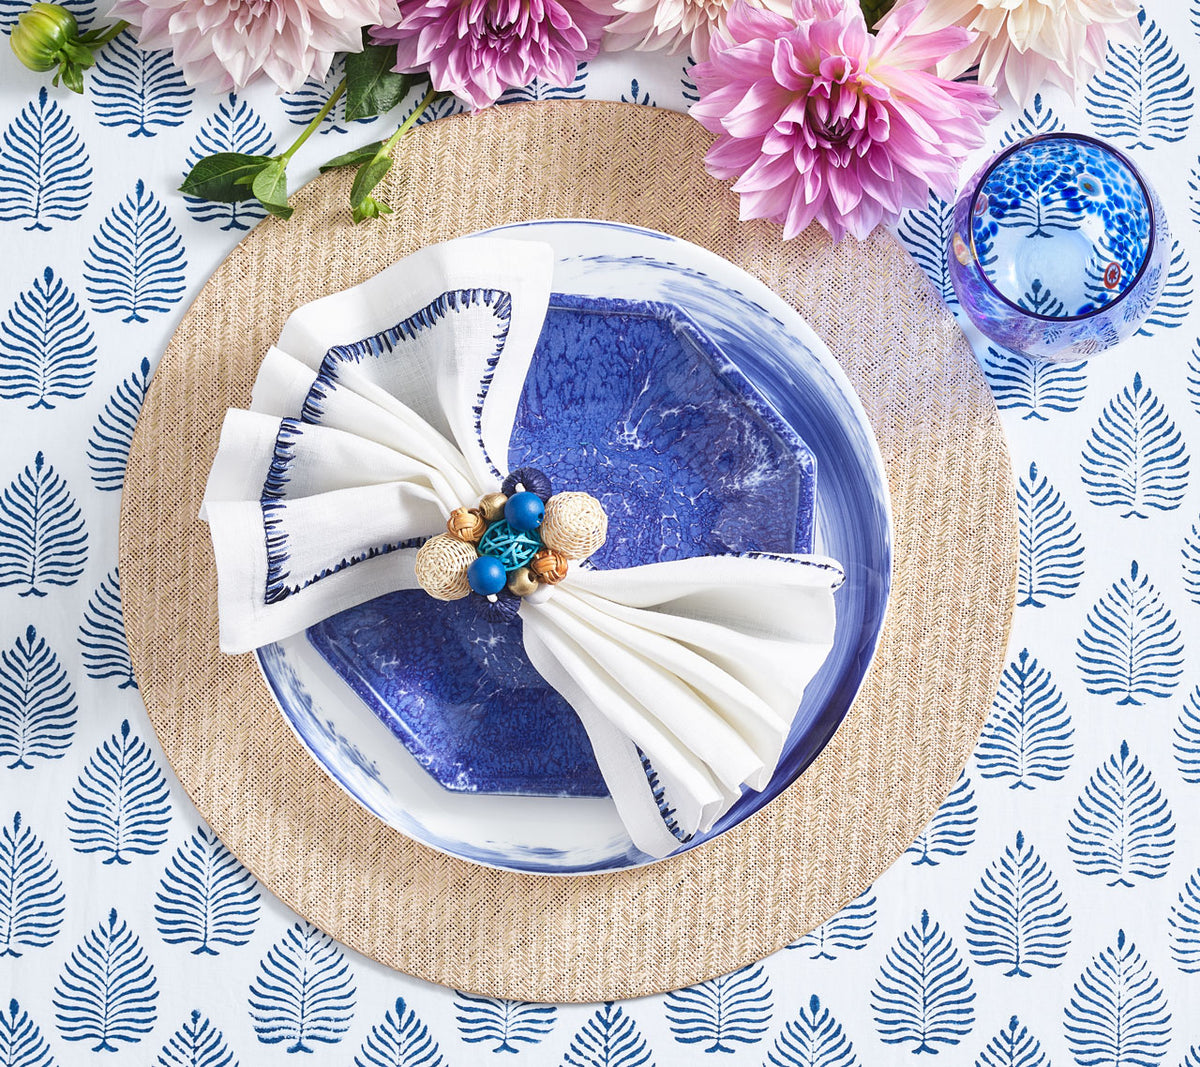 Java Napkin Ring holding a napkin with a blue border on top a blue plate